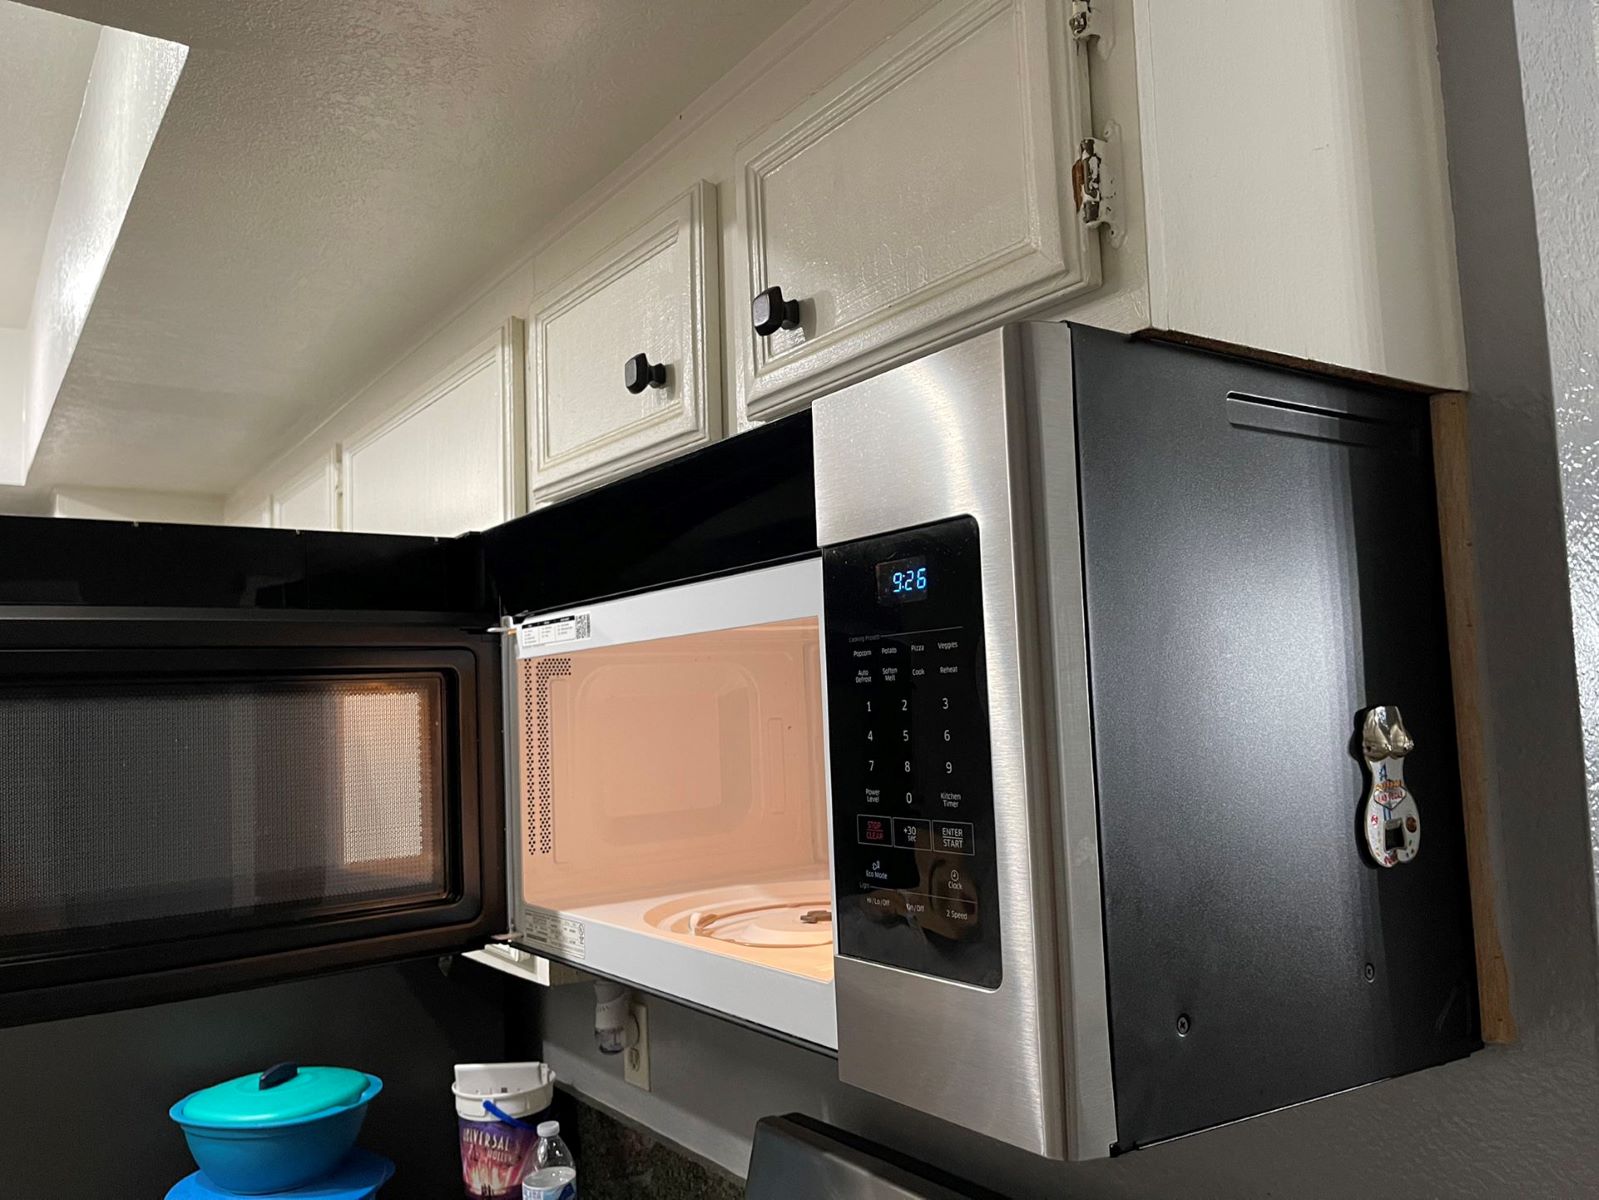 How To Fix The Error Code E-C1 For Samsung Microwave